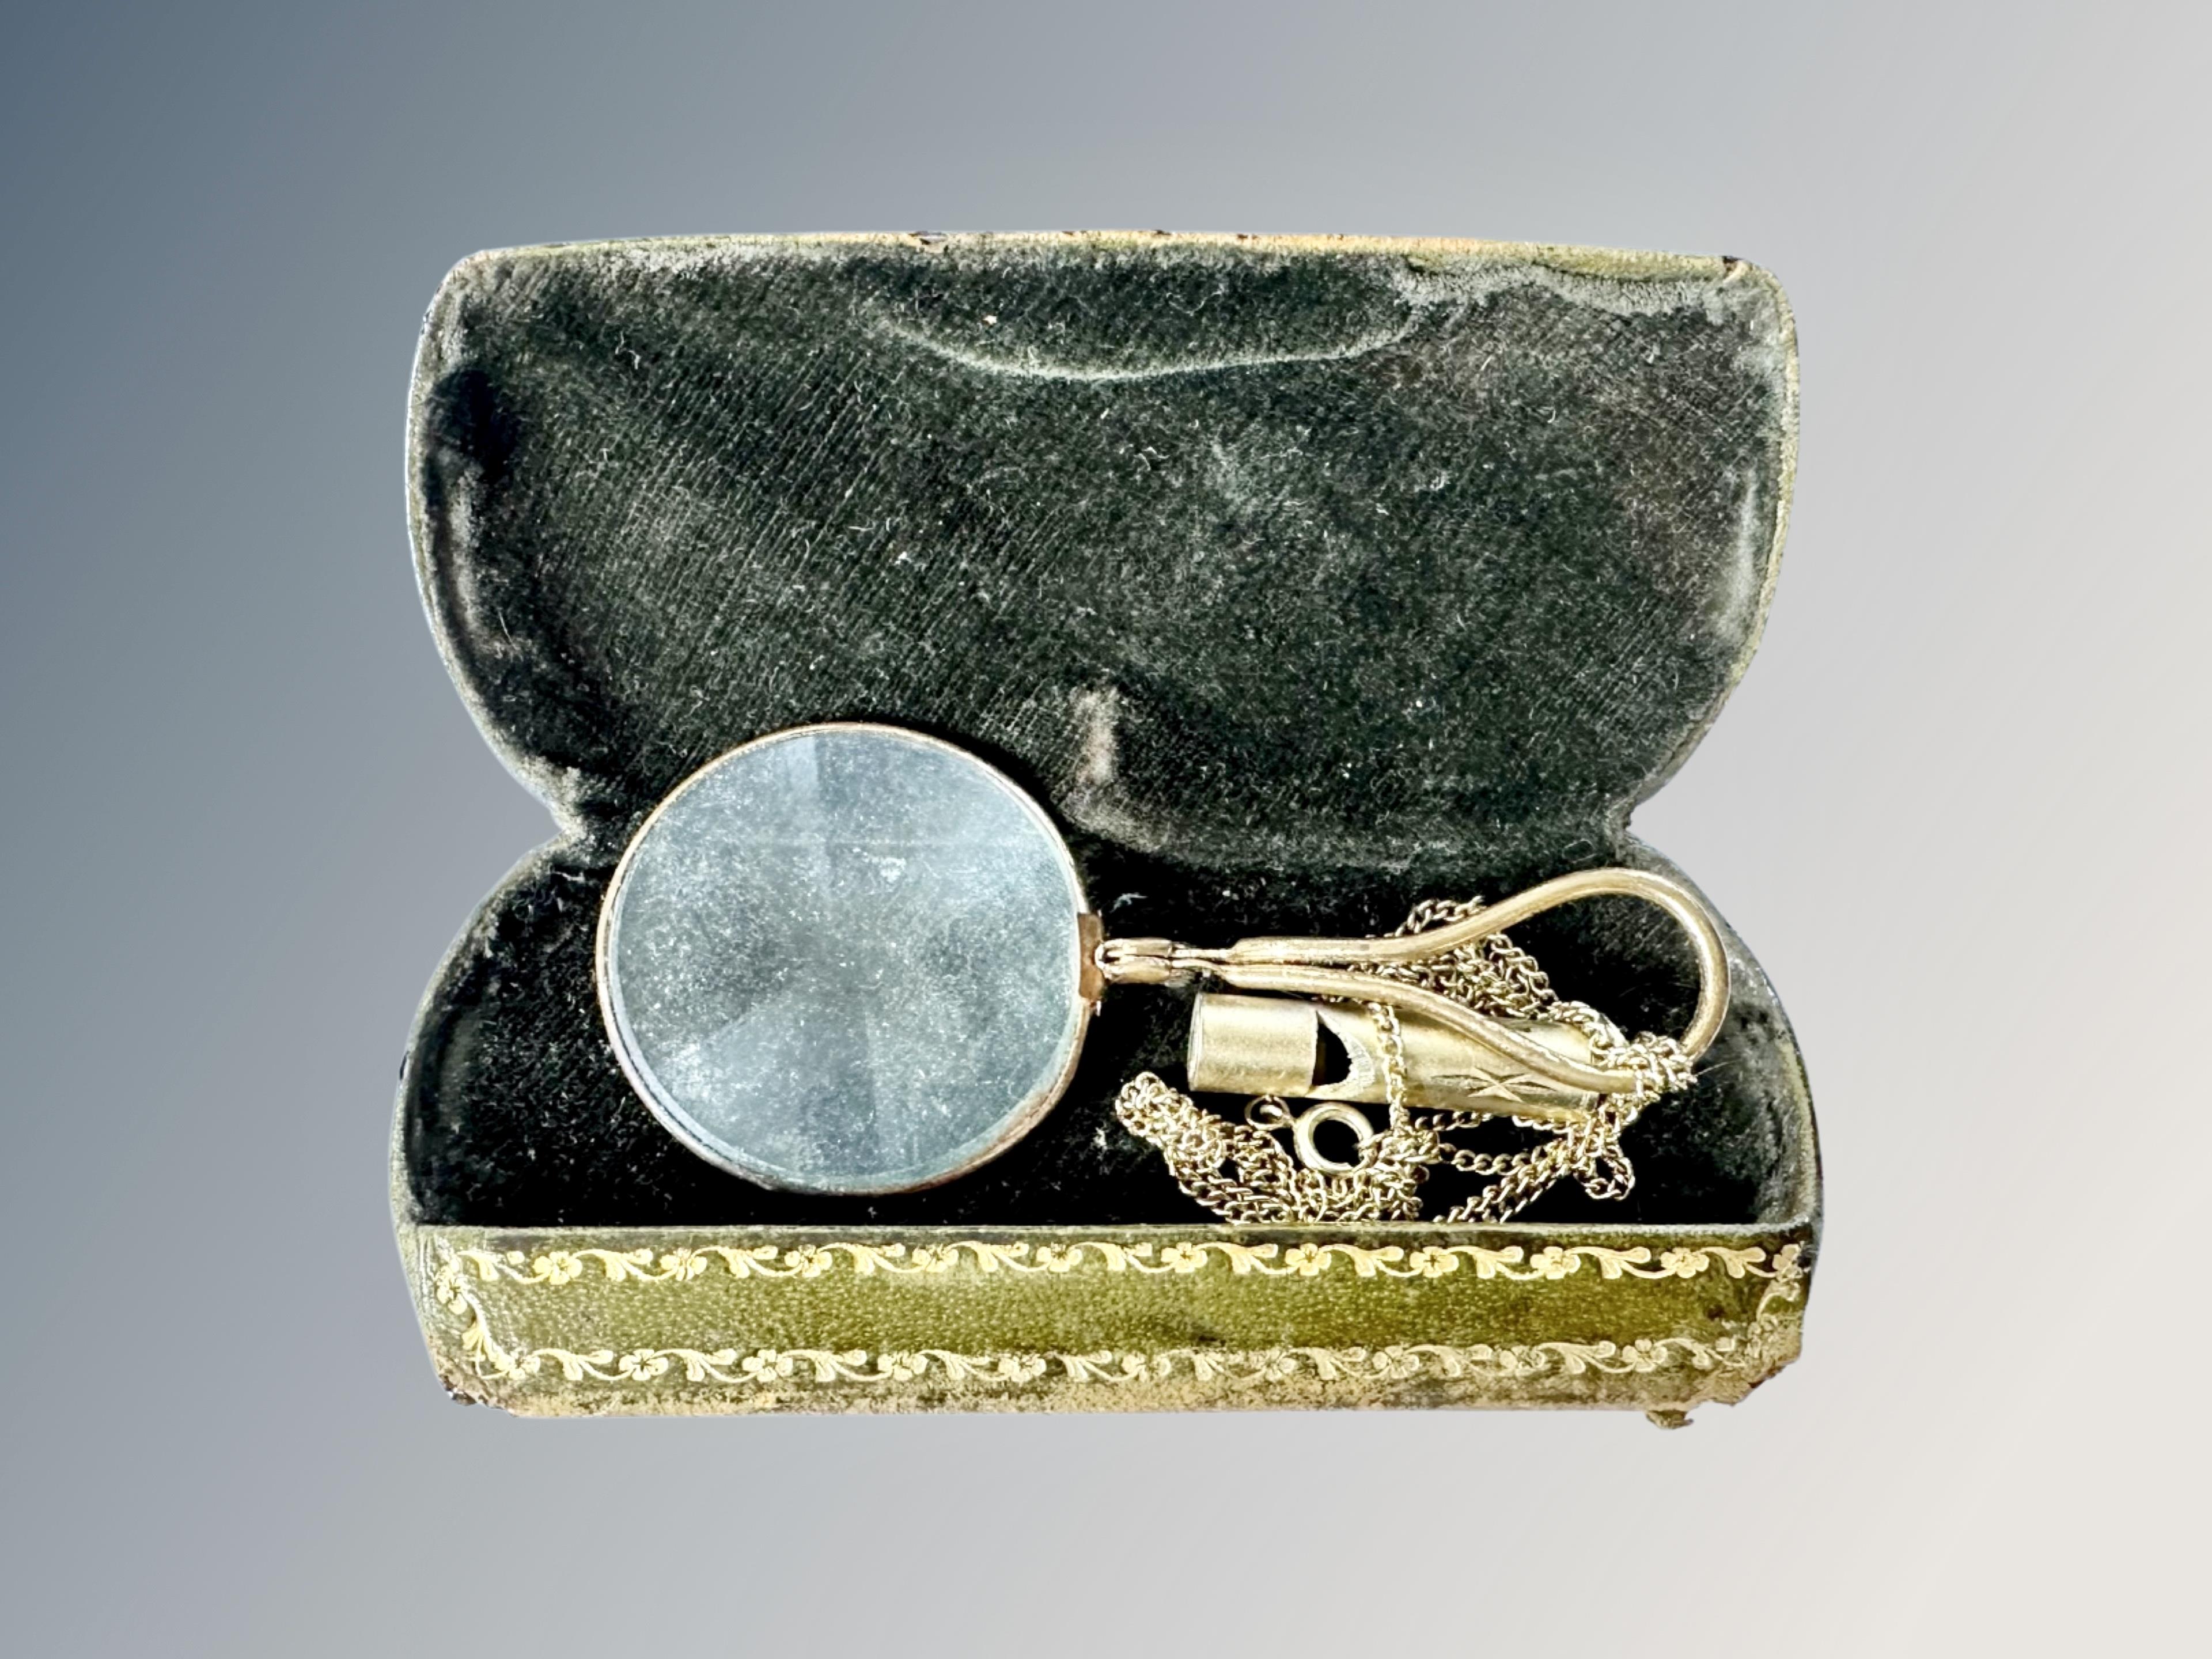 A 19th century tooled leather spectacles case containing a monocle.